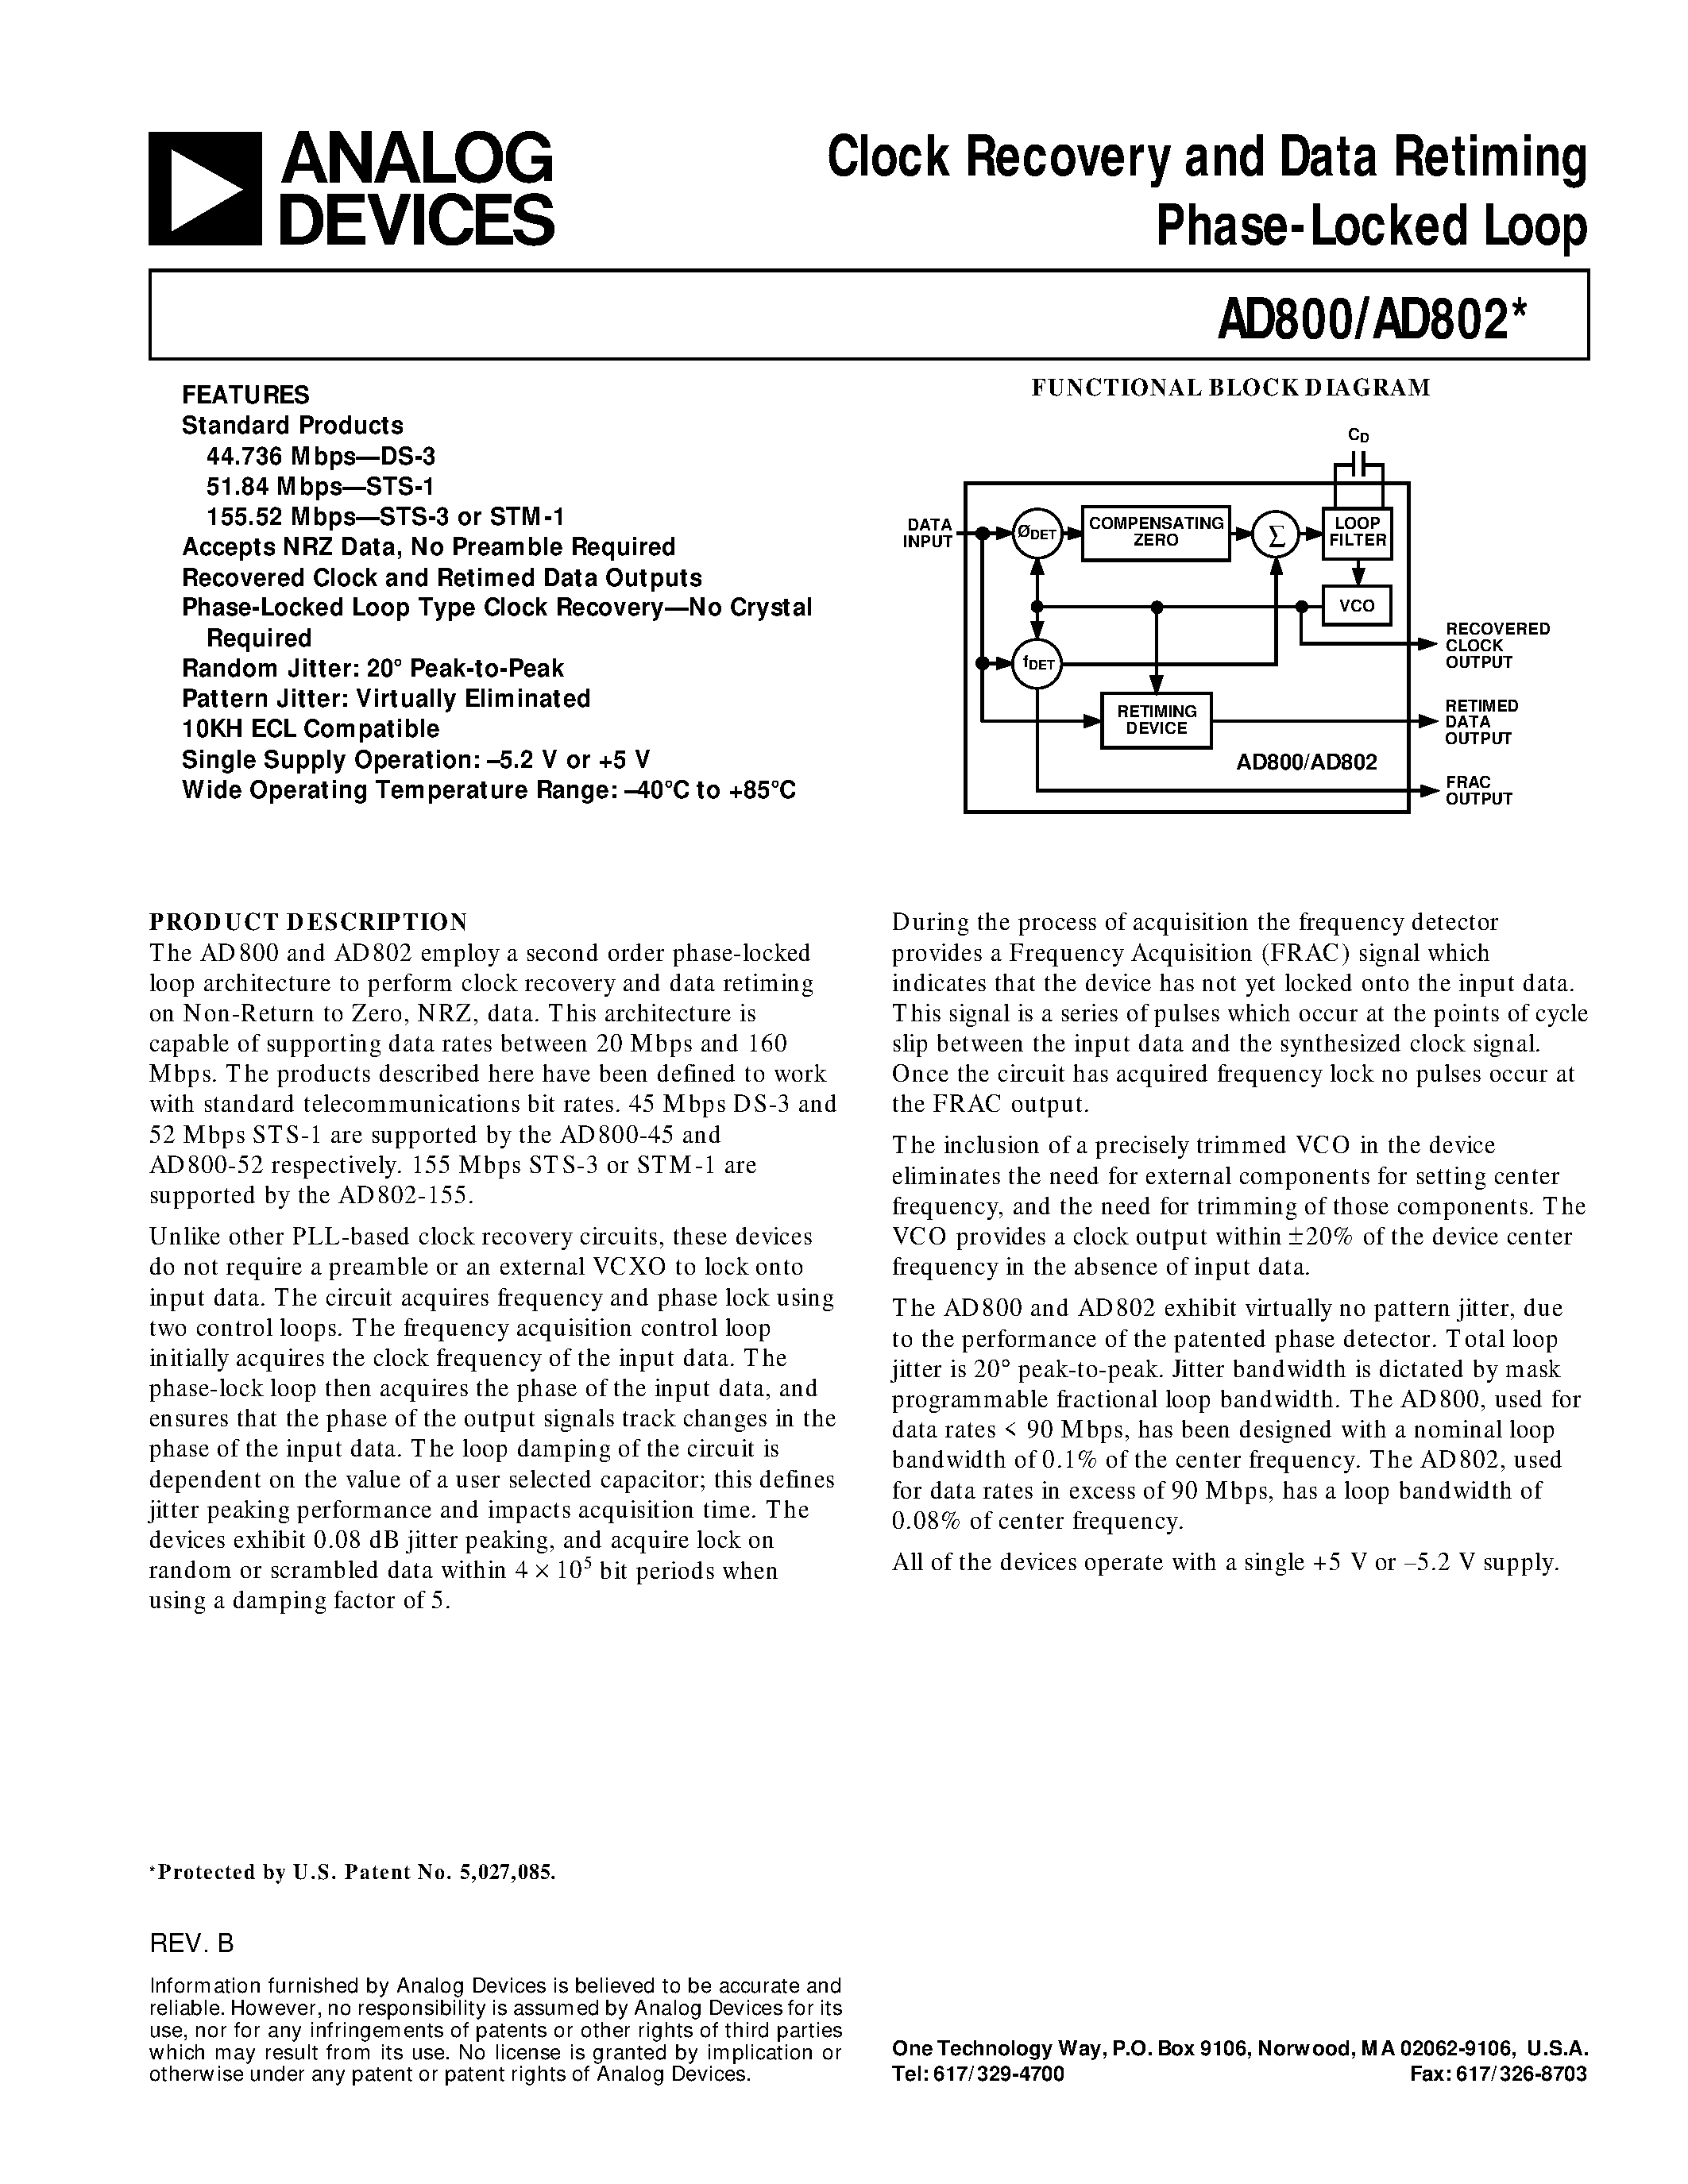 Datasheet AD800-52BR - Clock Recovery and Data Retiming Phase-Locked Loop page 1